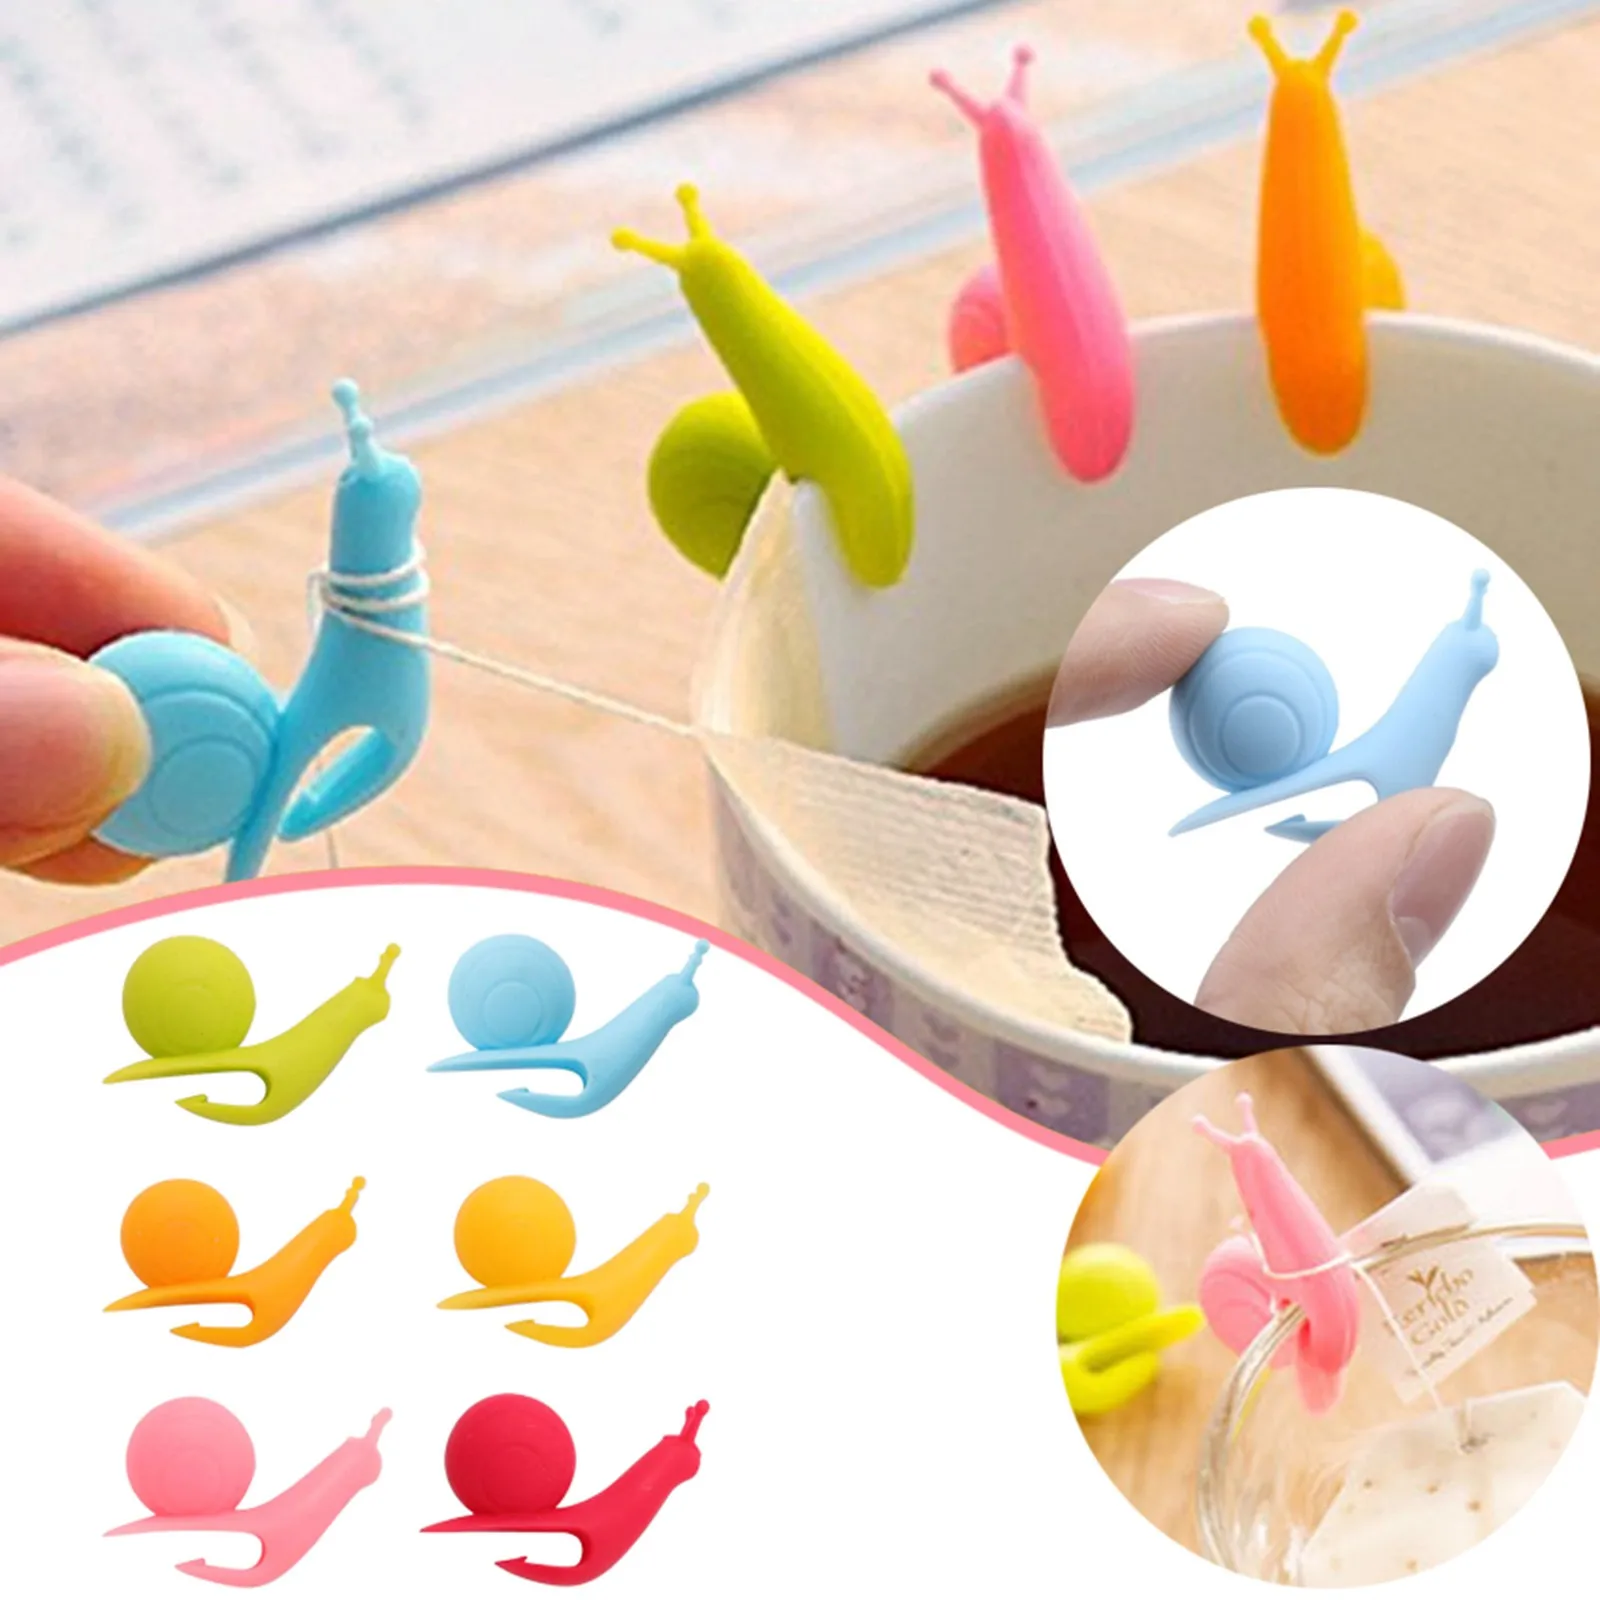 Vintage Shot Shell Boxes Silicone Tea Bag Holder Multicolor Cute Drink Marker Tea Accessories For Party Banquet Glasses for Cafe